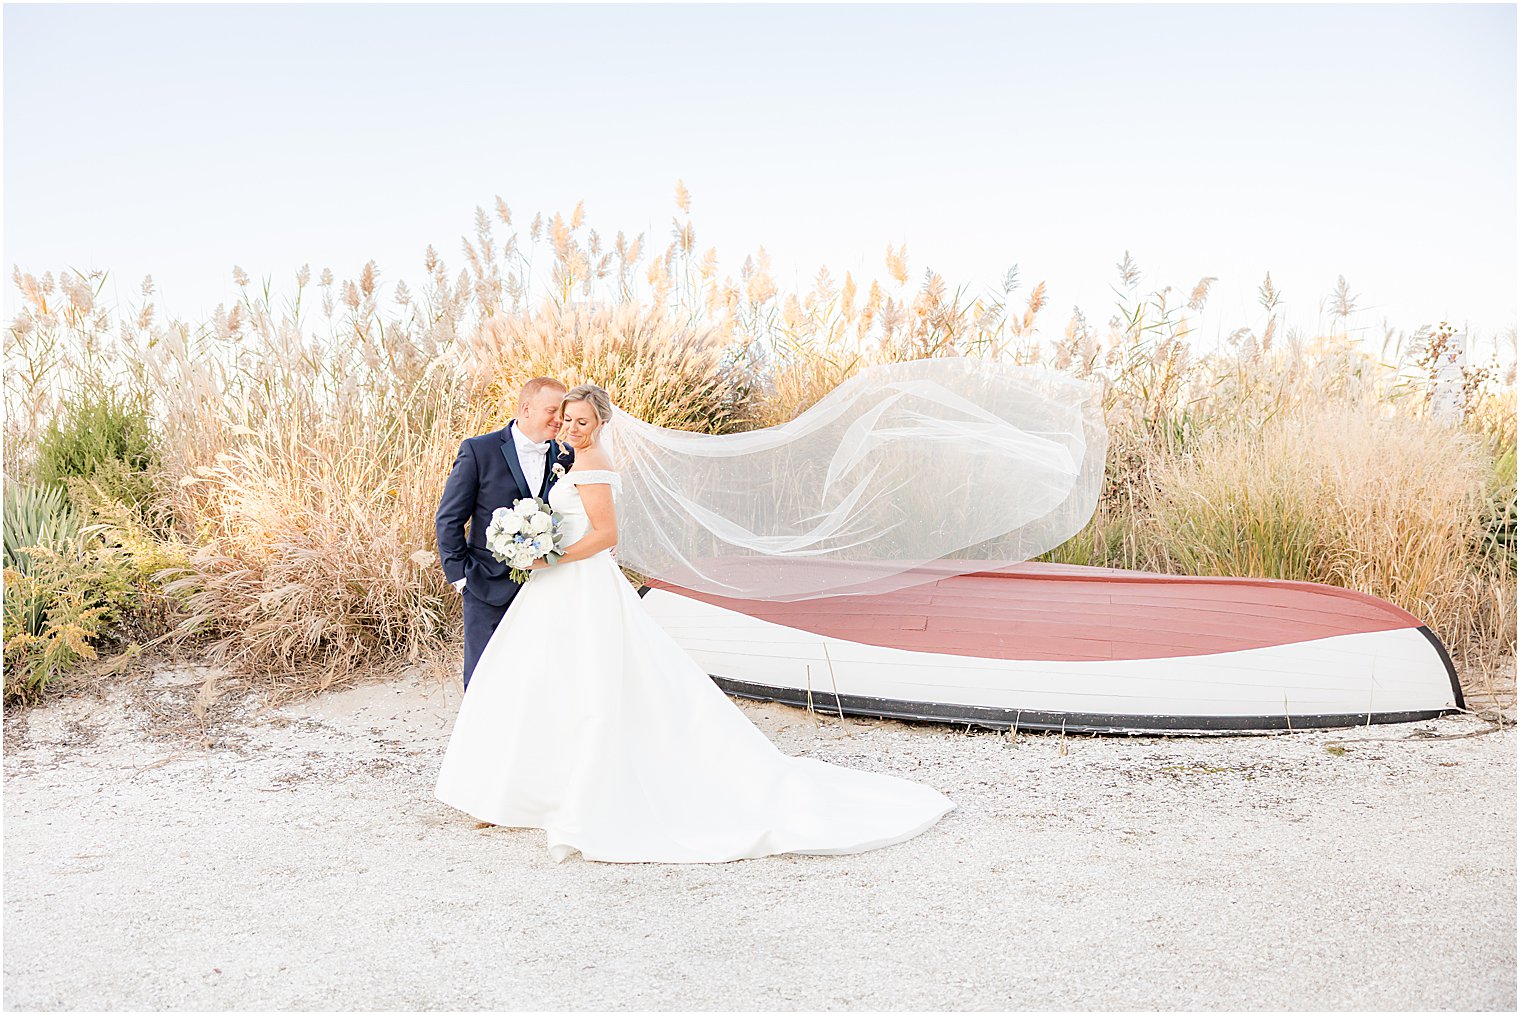 groom nuzzles bride's cheek as veil floats standing by canoe 